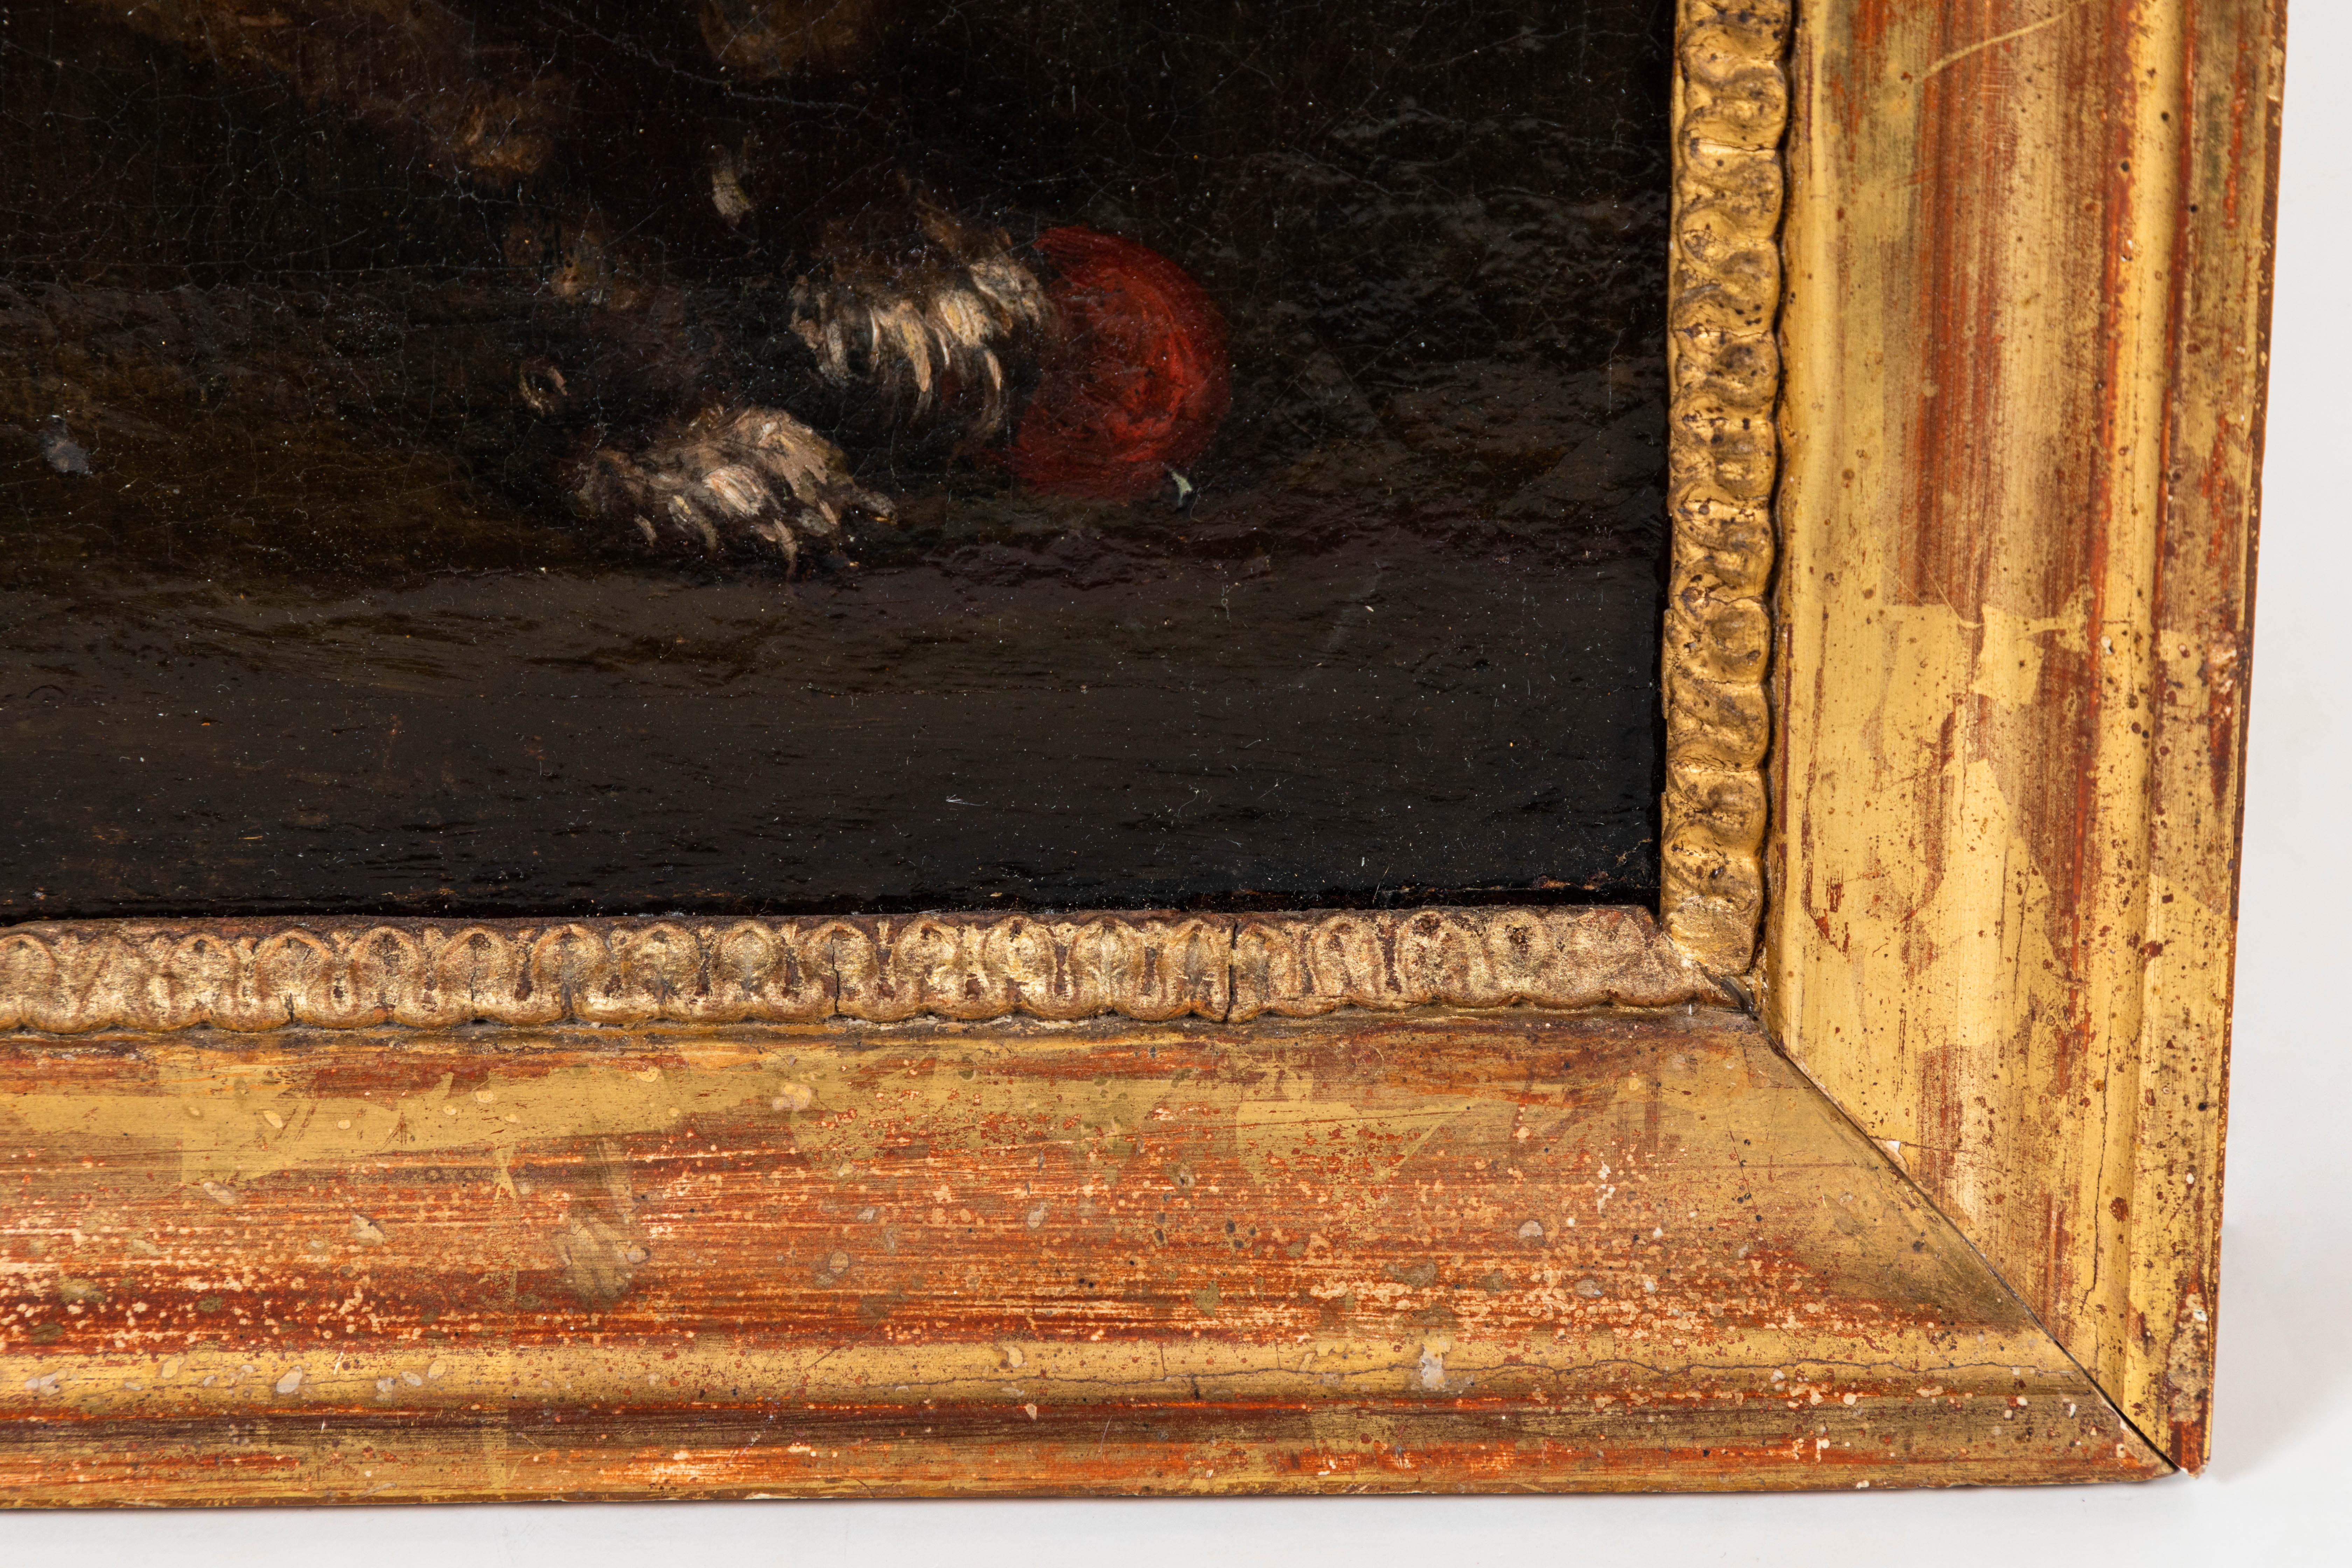 Hand-Painted 17th Century Oil Painting of a Dog at Play